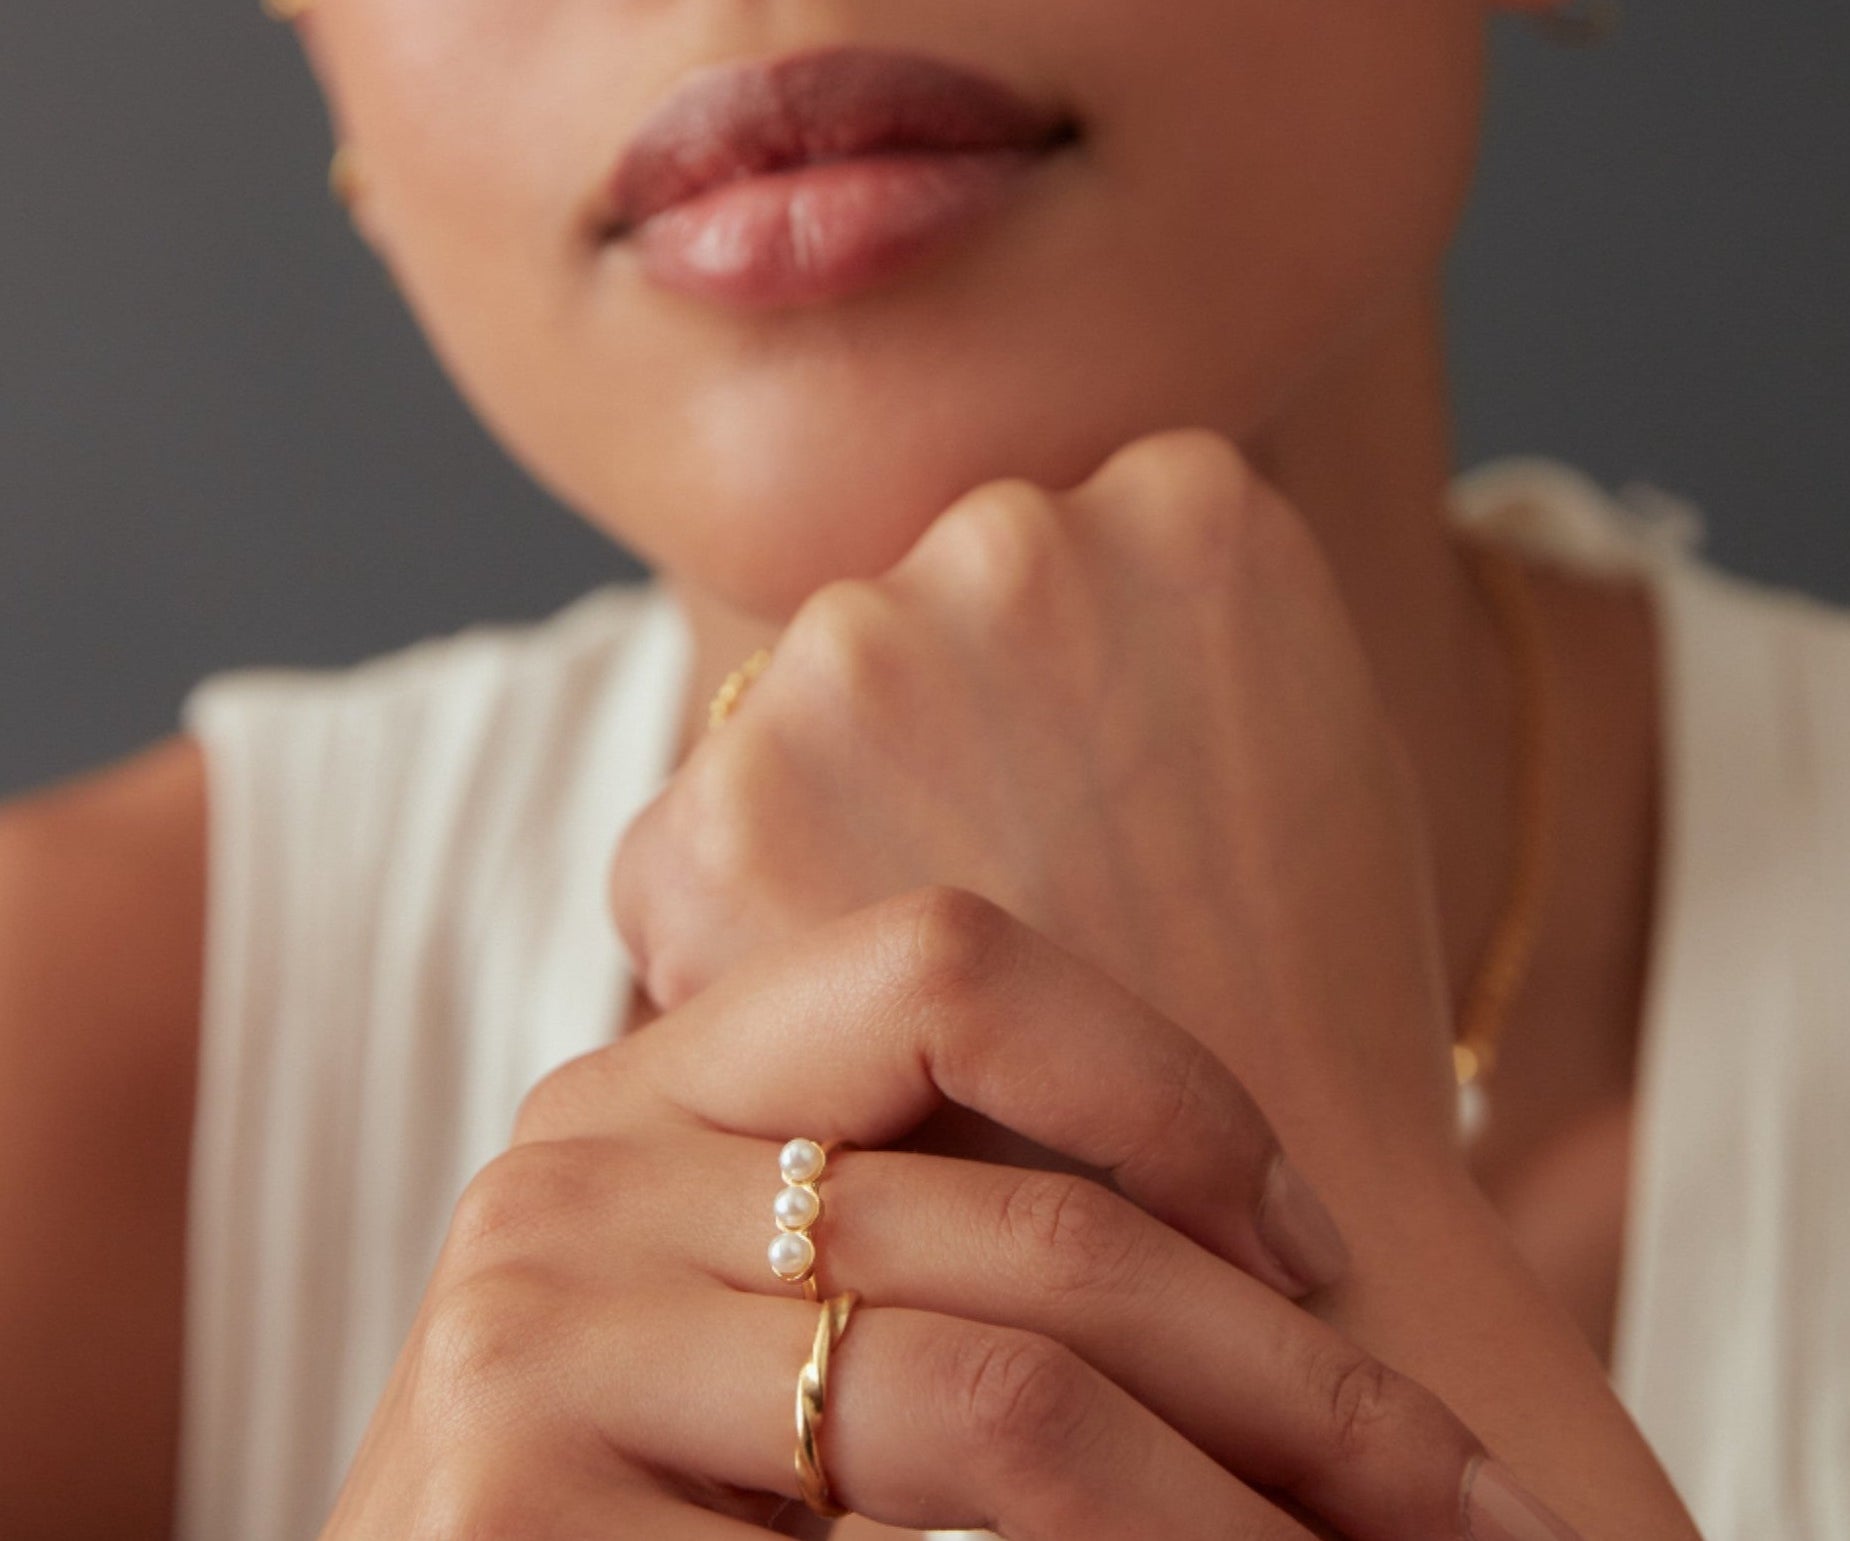 Sabina Gold Stacking Ring | Sustainable Jewellery by Ottoman Hands